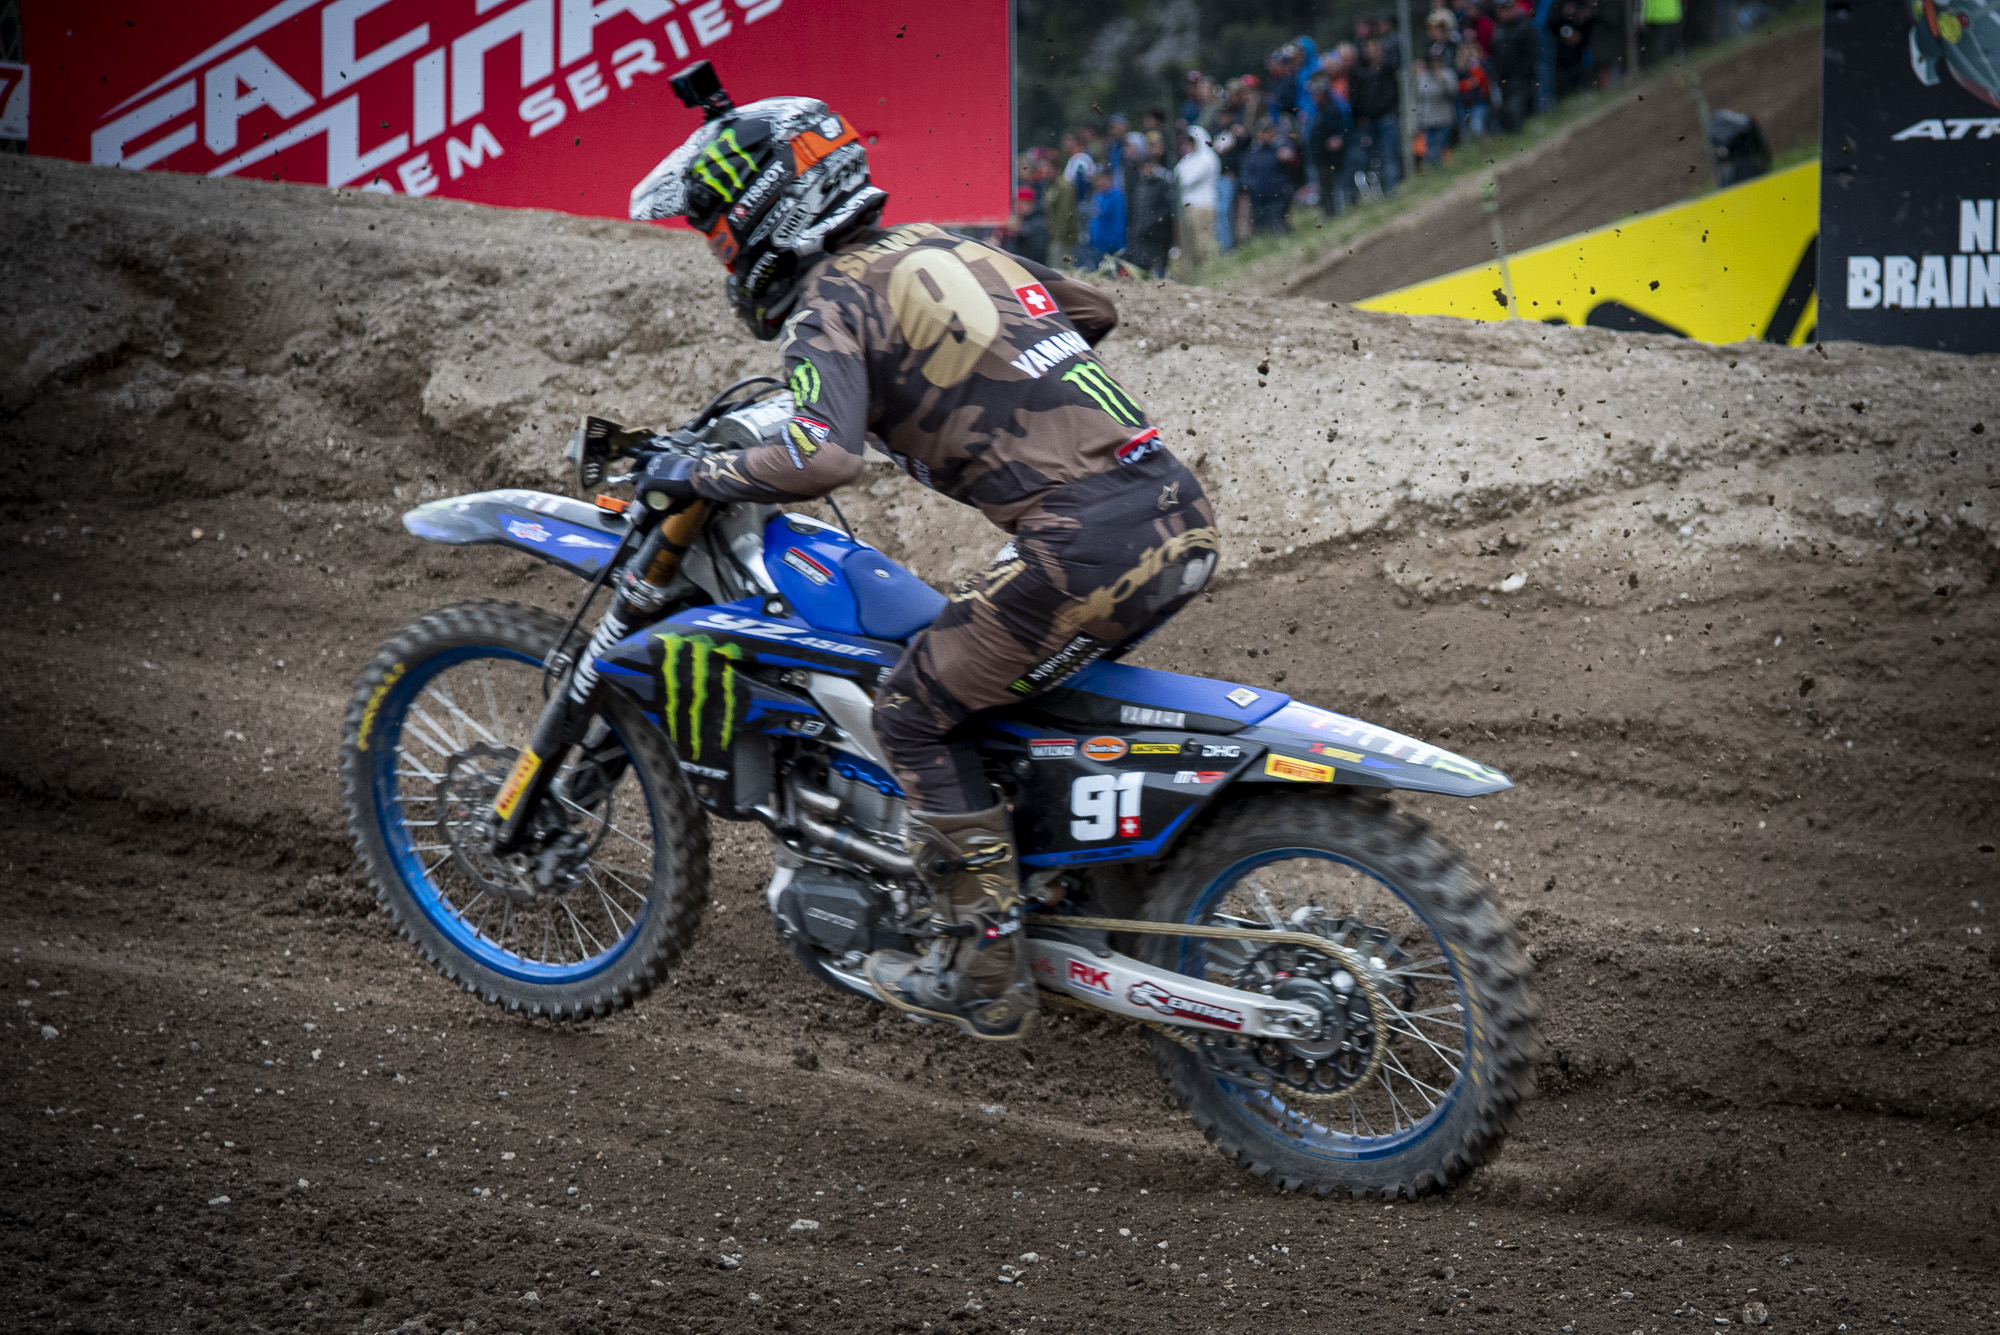 Jarred Elrod, Photography, MXGP, Arco, Trentino, Italy, Jeremy Seewer